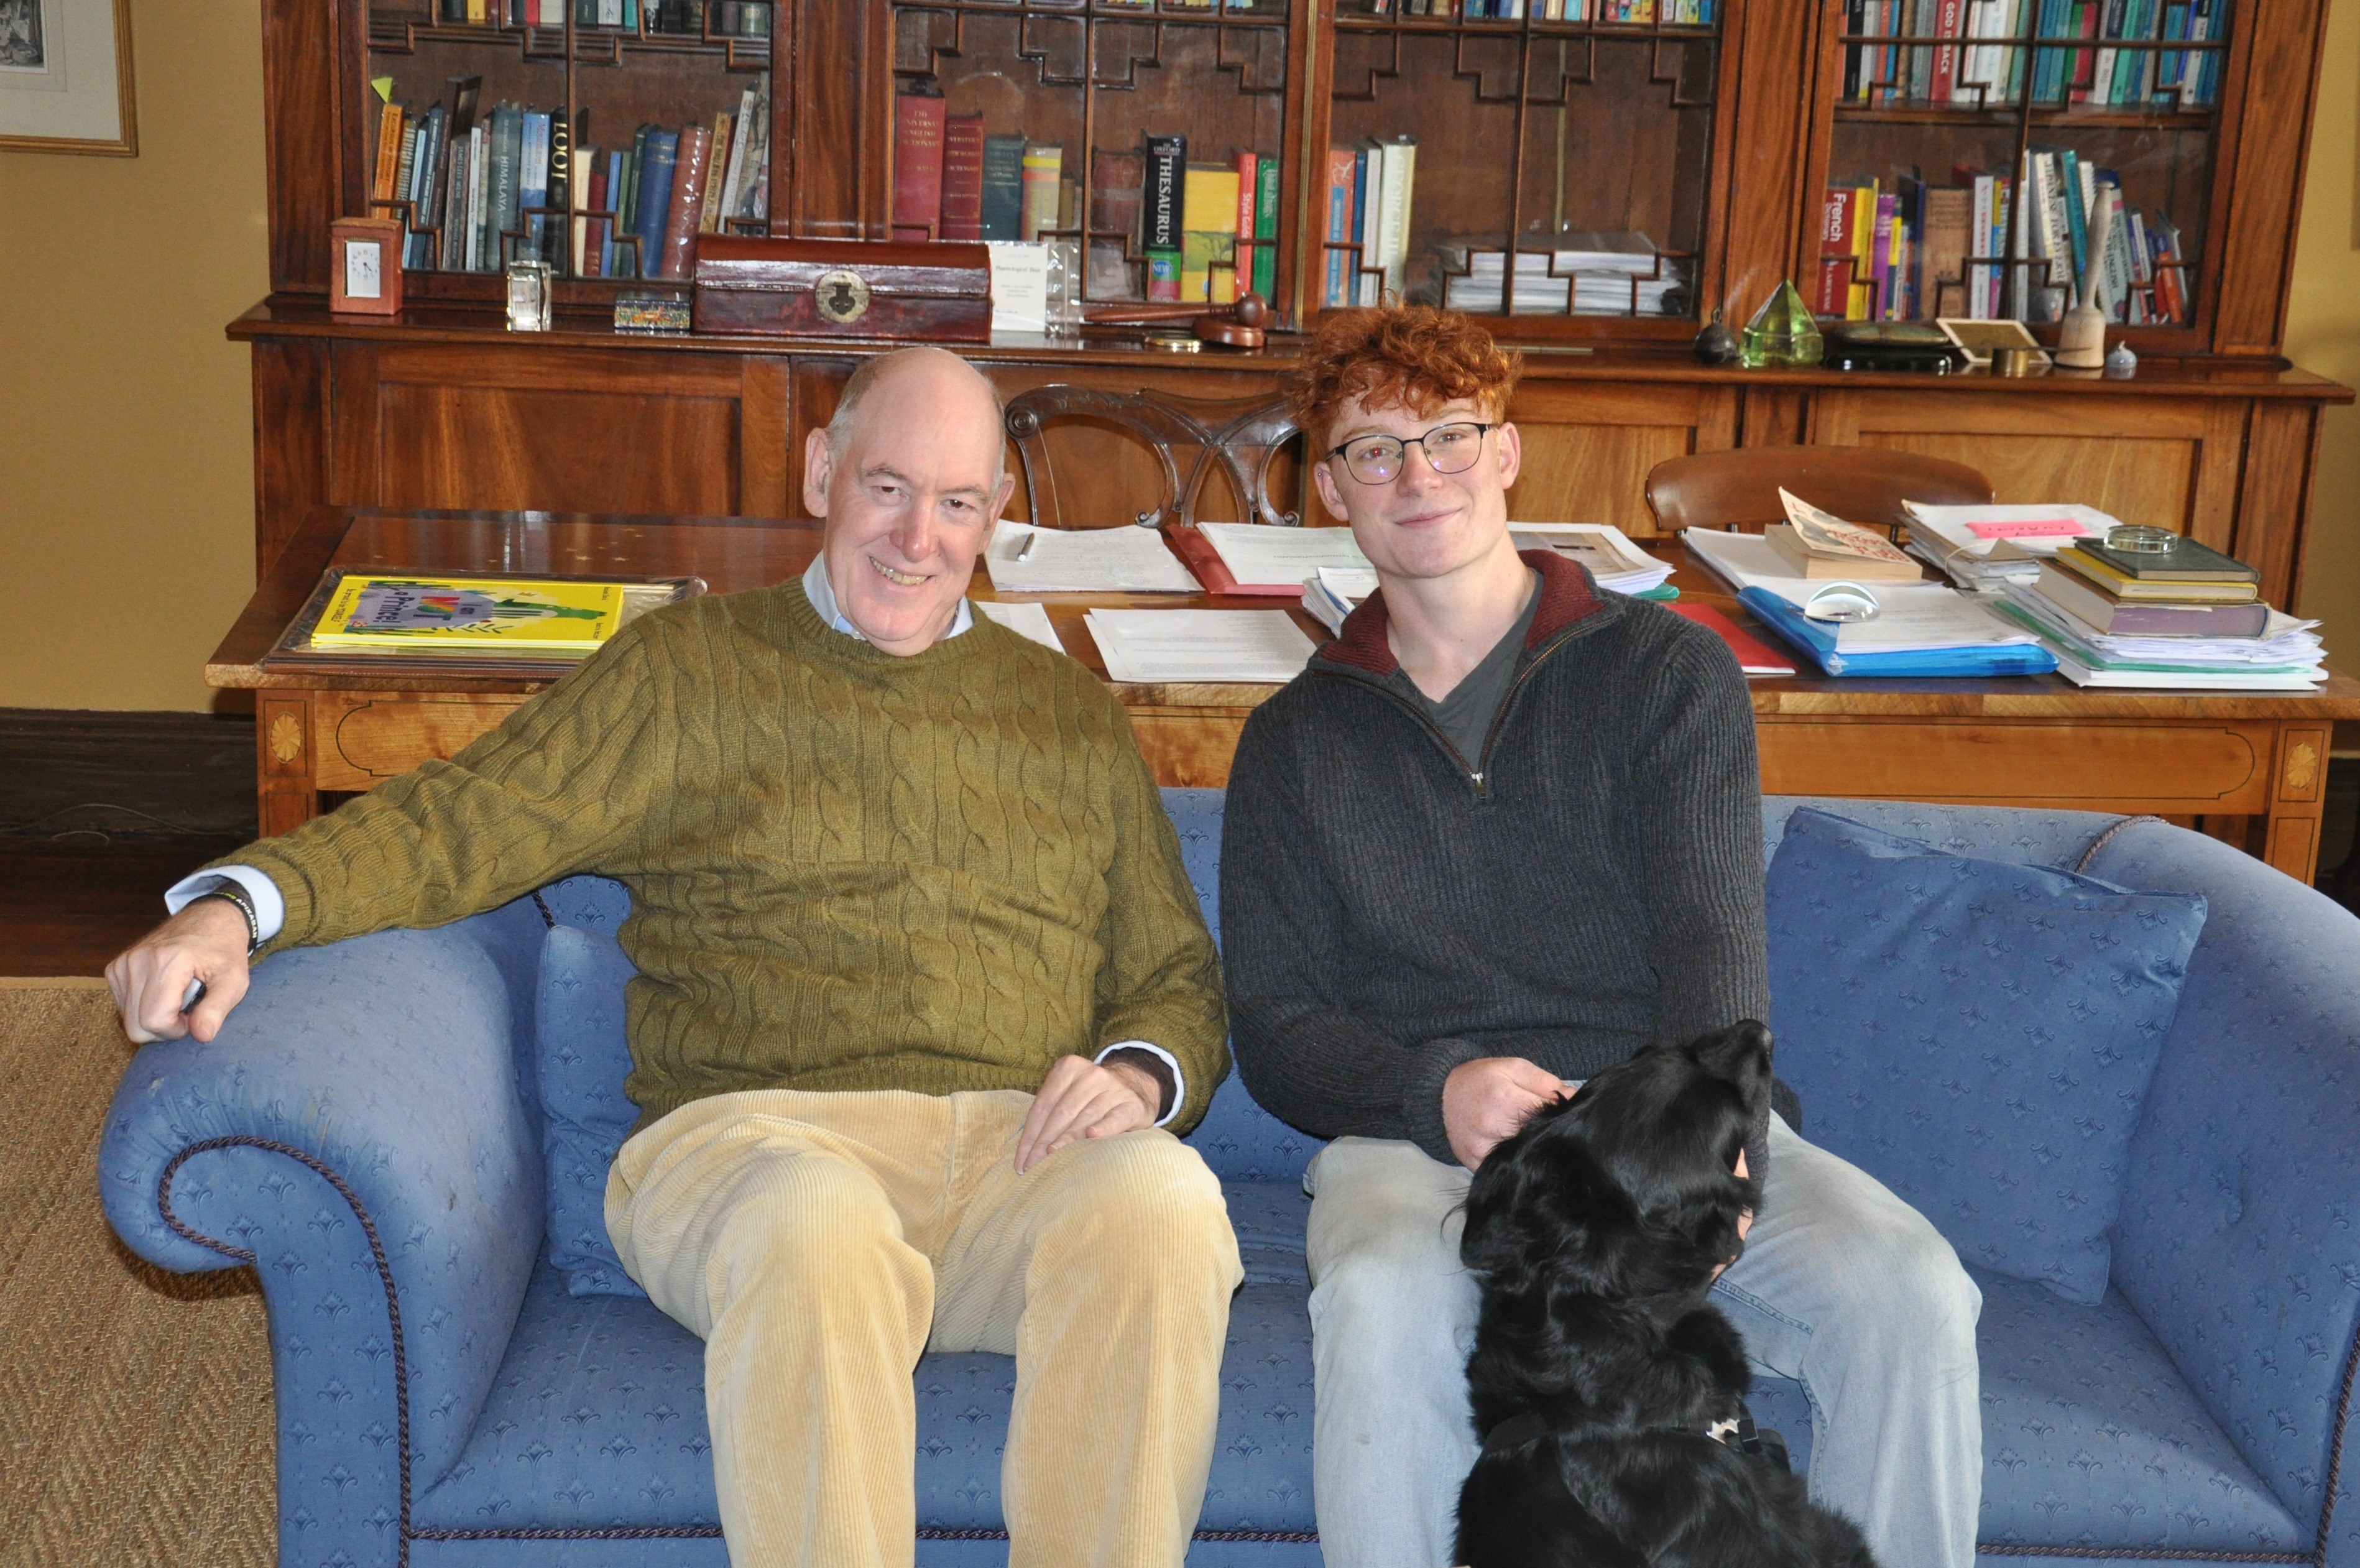 The Warden and Patrick Mayhew sitting on a sofa in the Warden's office